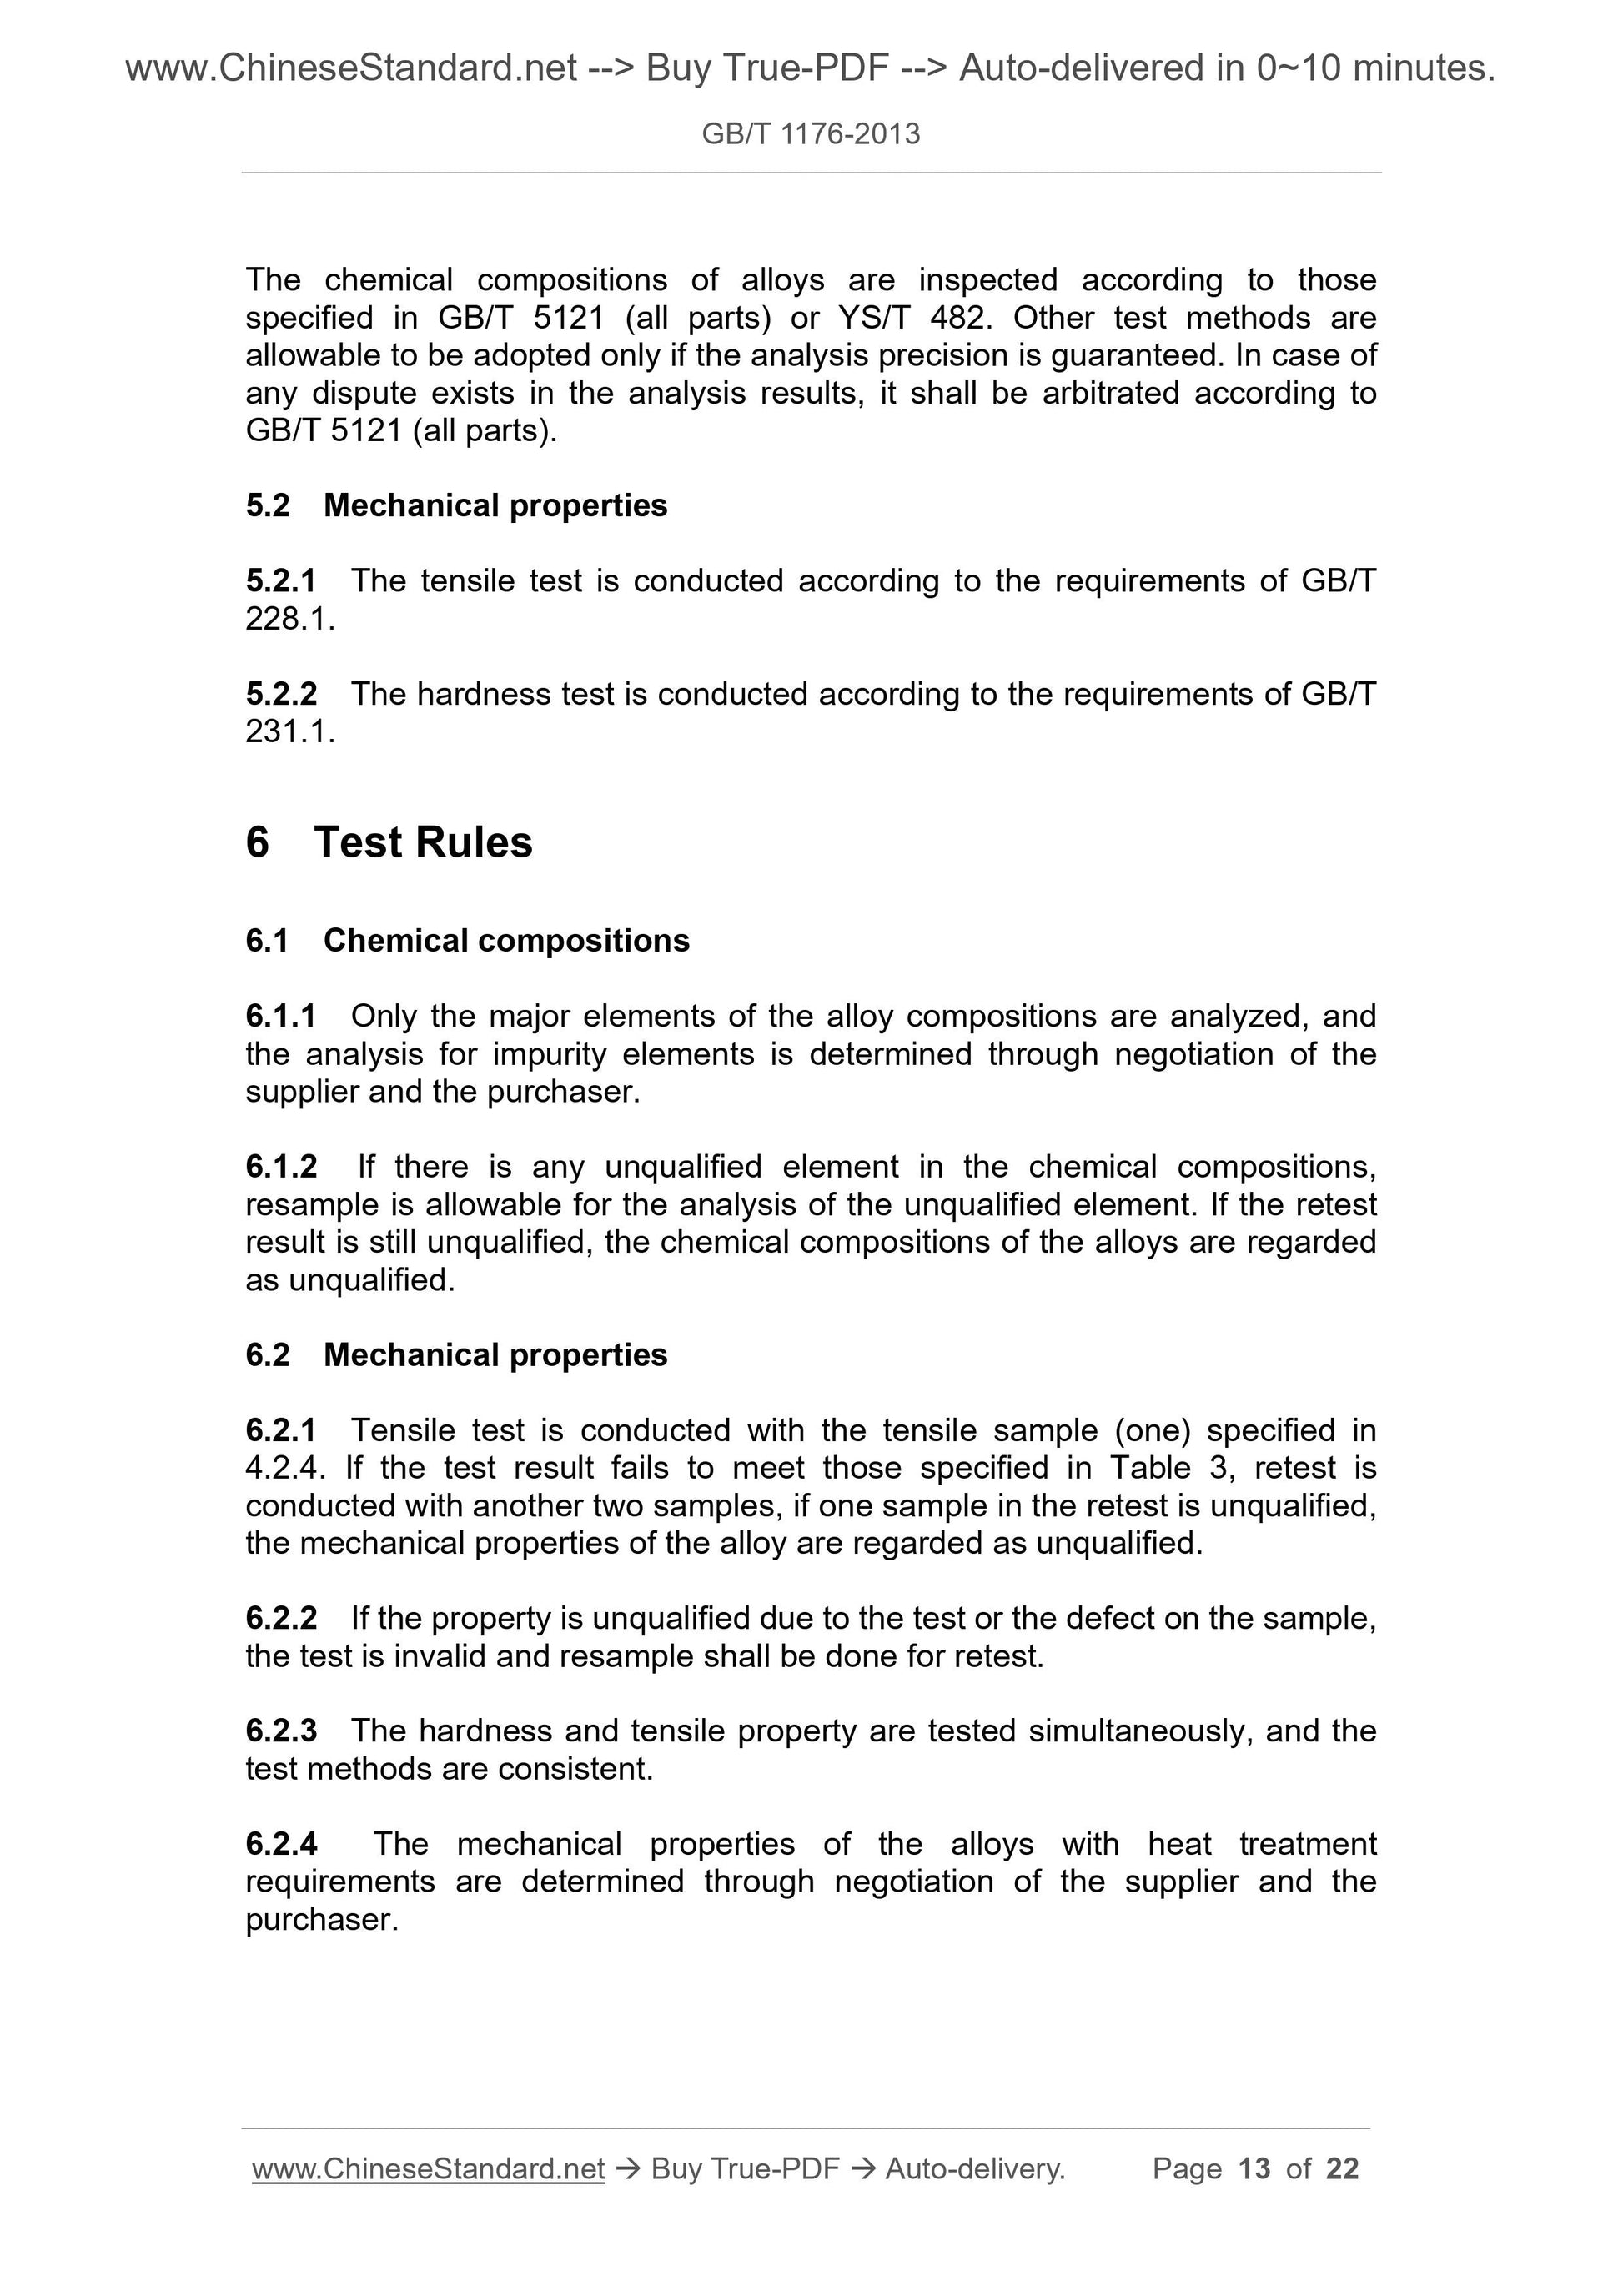 GB/T 1176-2013 Page 5